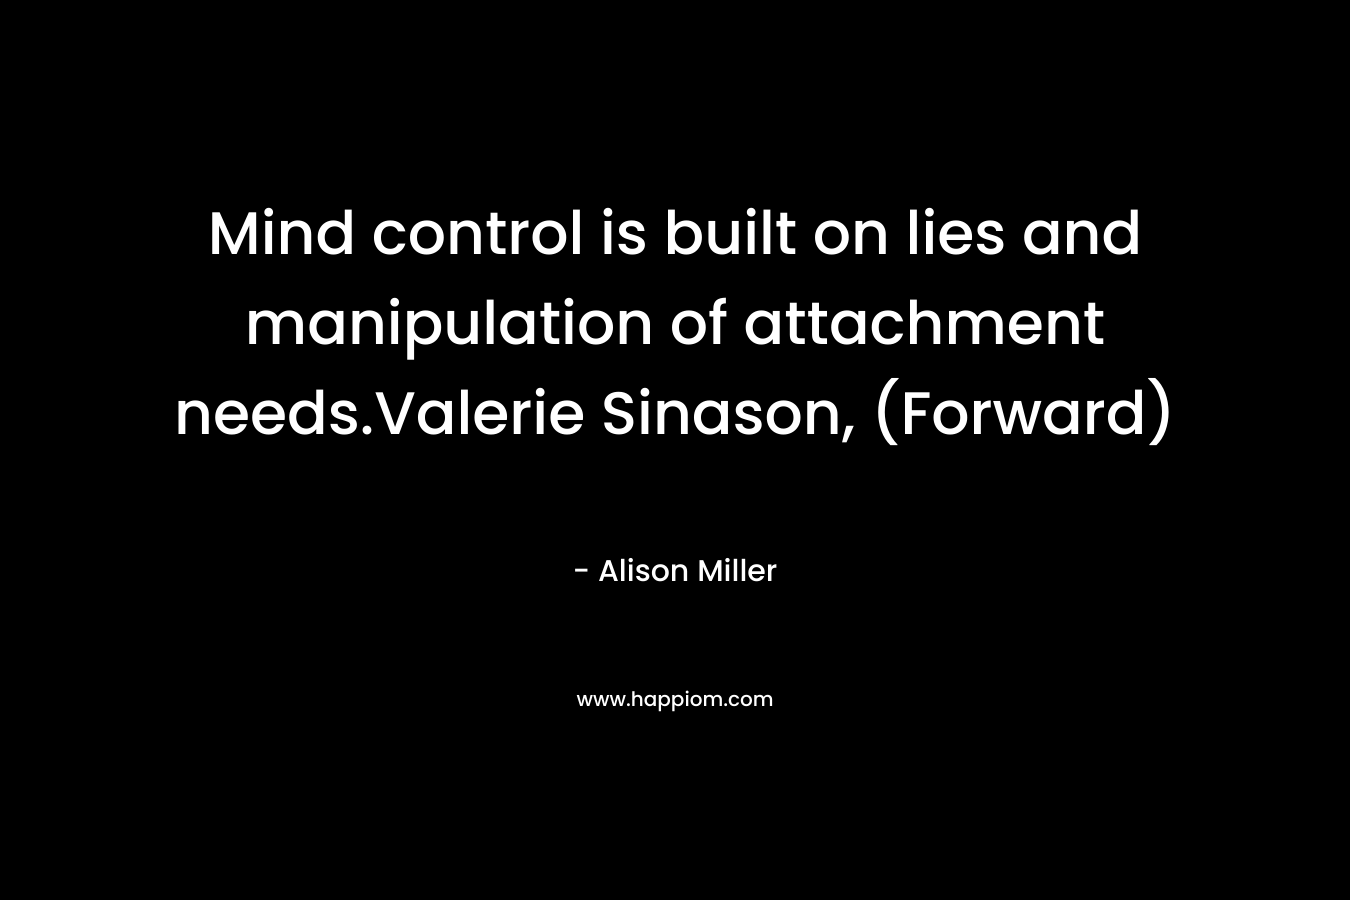 Mind control is built on lies and manipulation of attachment needs.Valerie Sinason, (Forward)